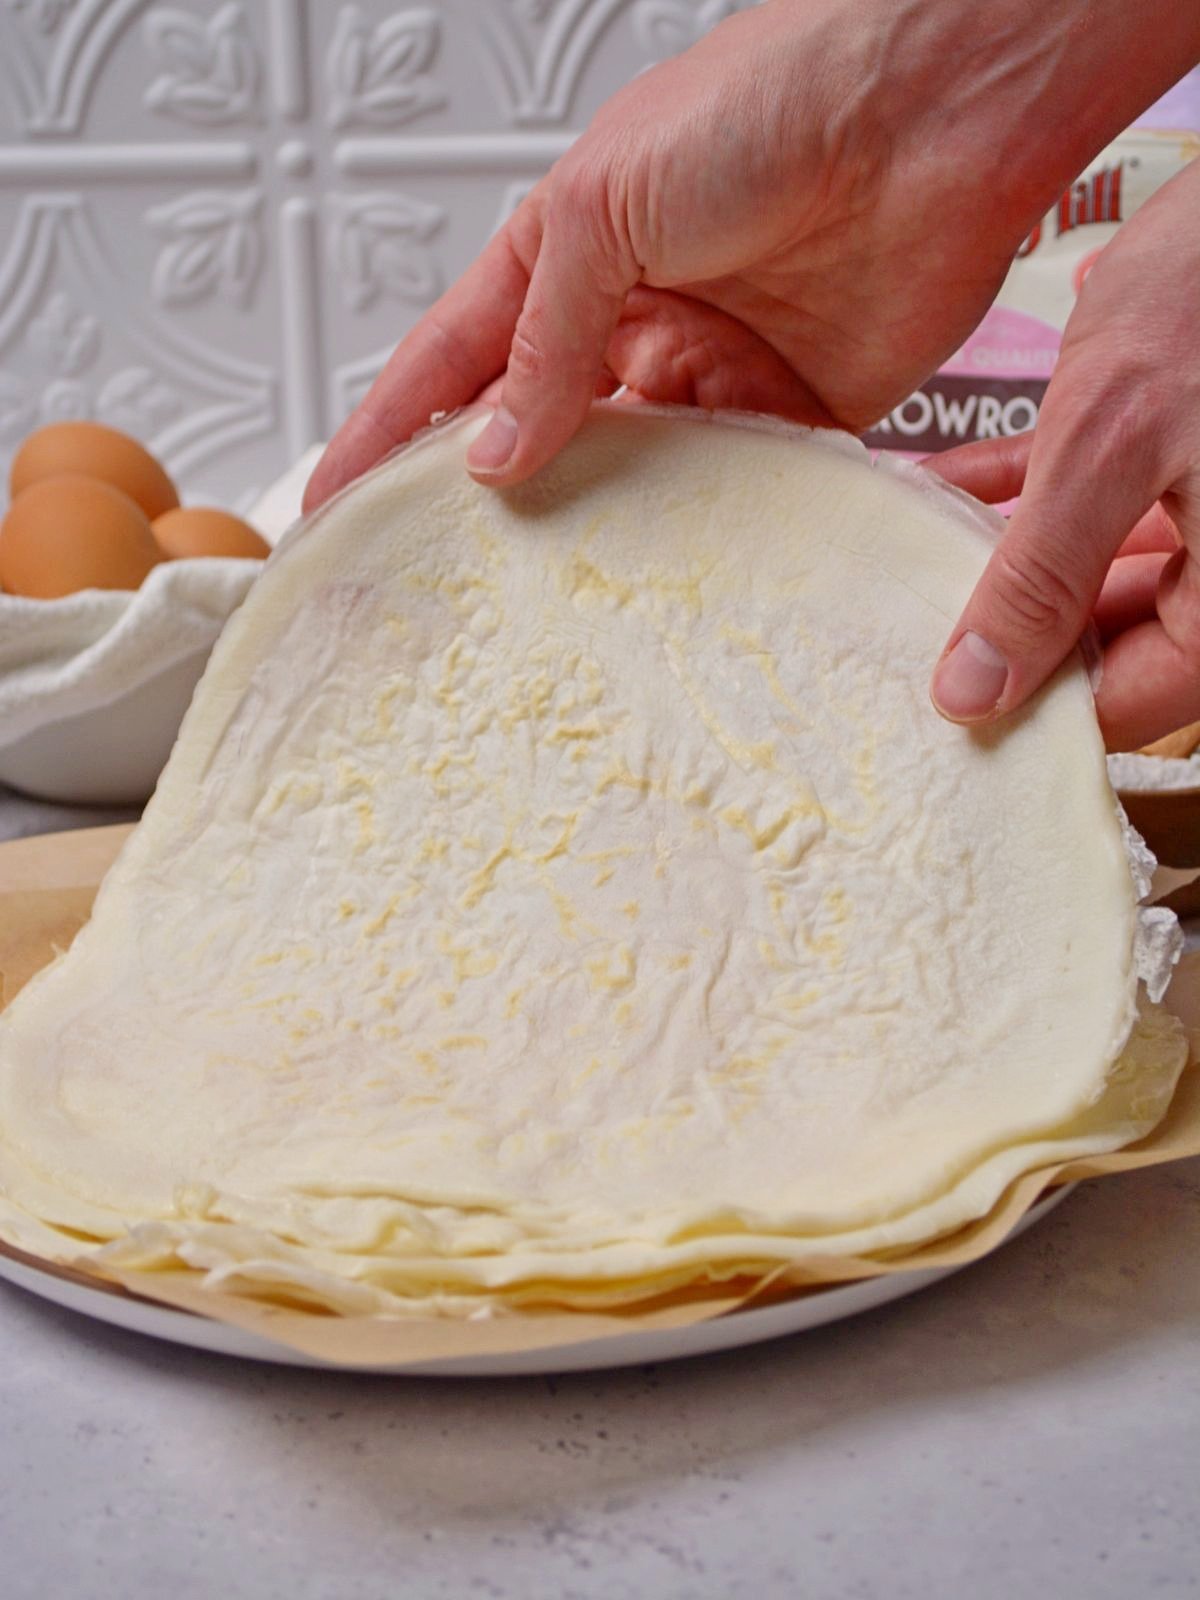 Egg white Wrap being lifted by two hands.